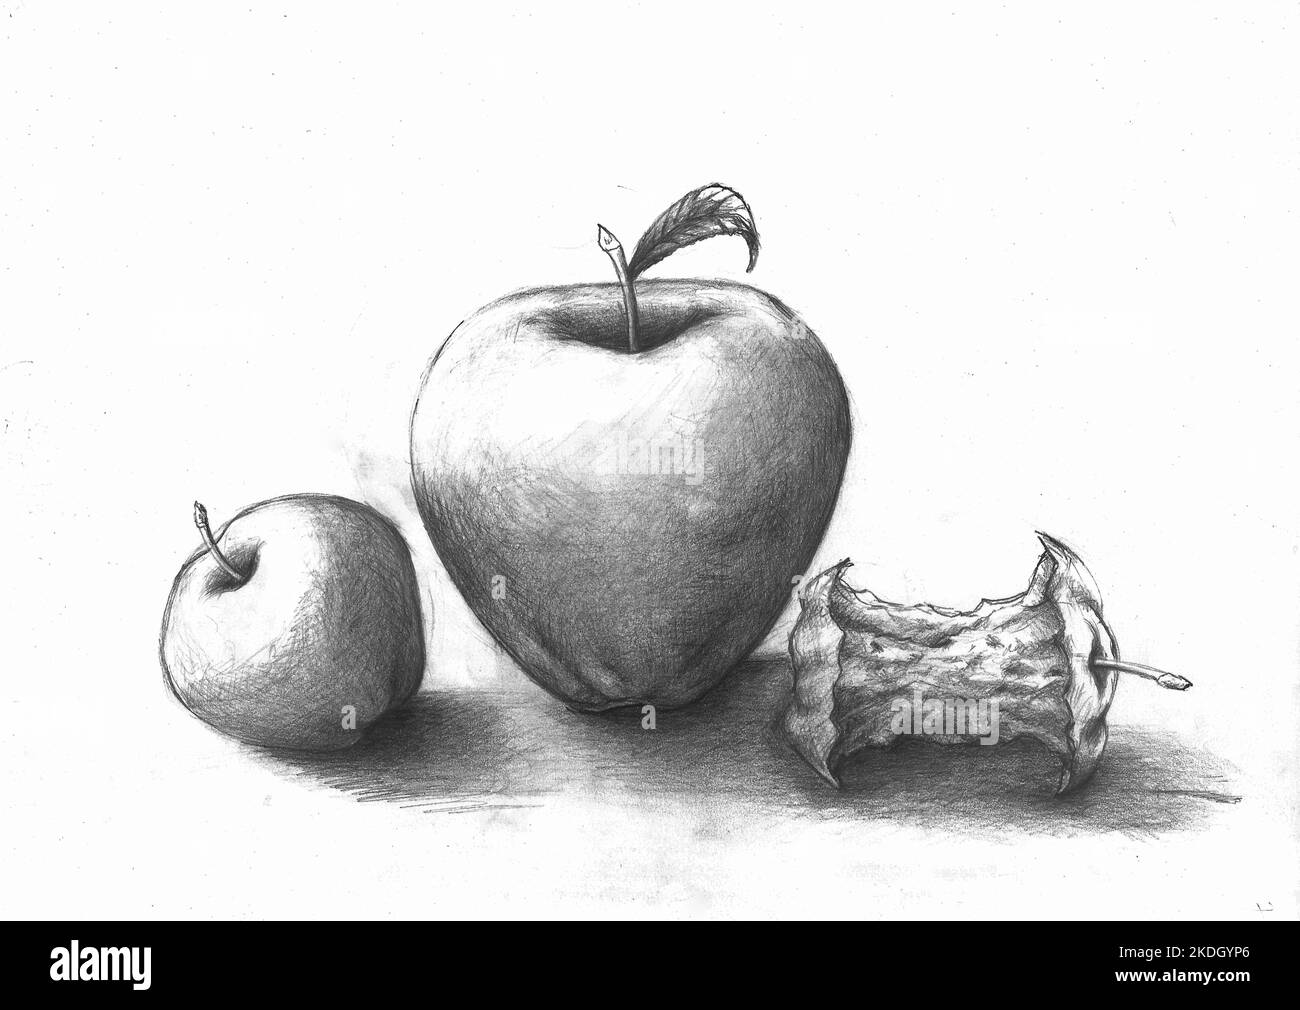 Black and white apples. Charcoal drawing of three apples. Drawn by the photographer. Stock Photo